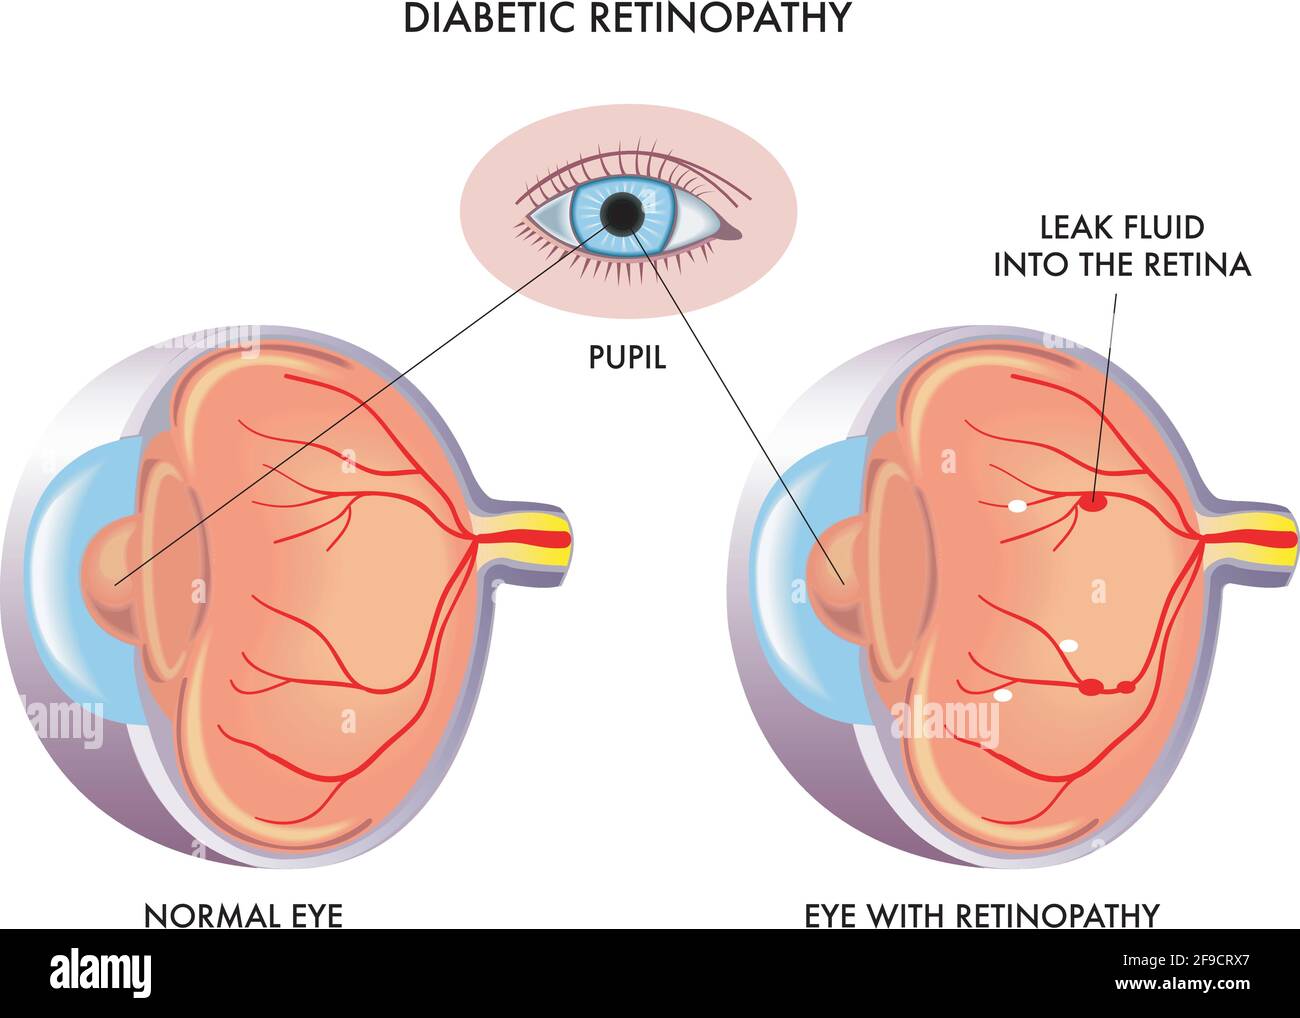 Medical illustration compares a normal eye to one with diabetic retinopathy, with annotations. Stock Vector